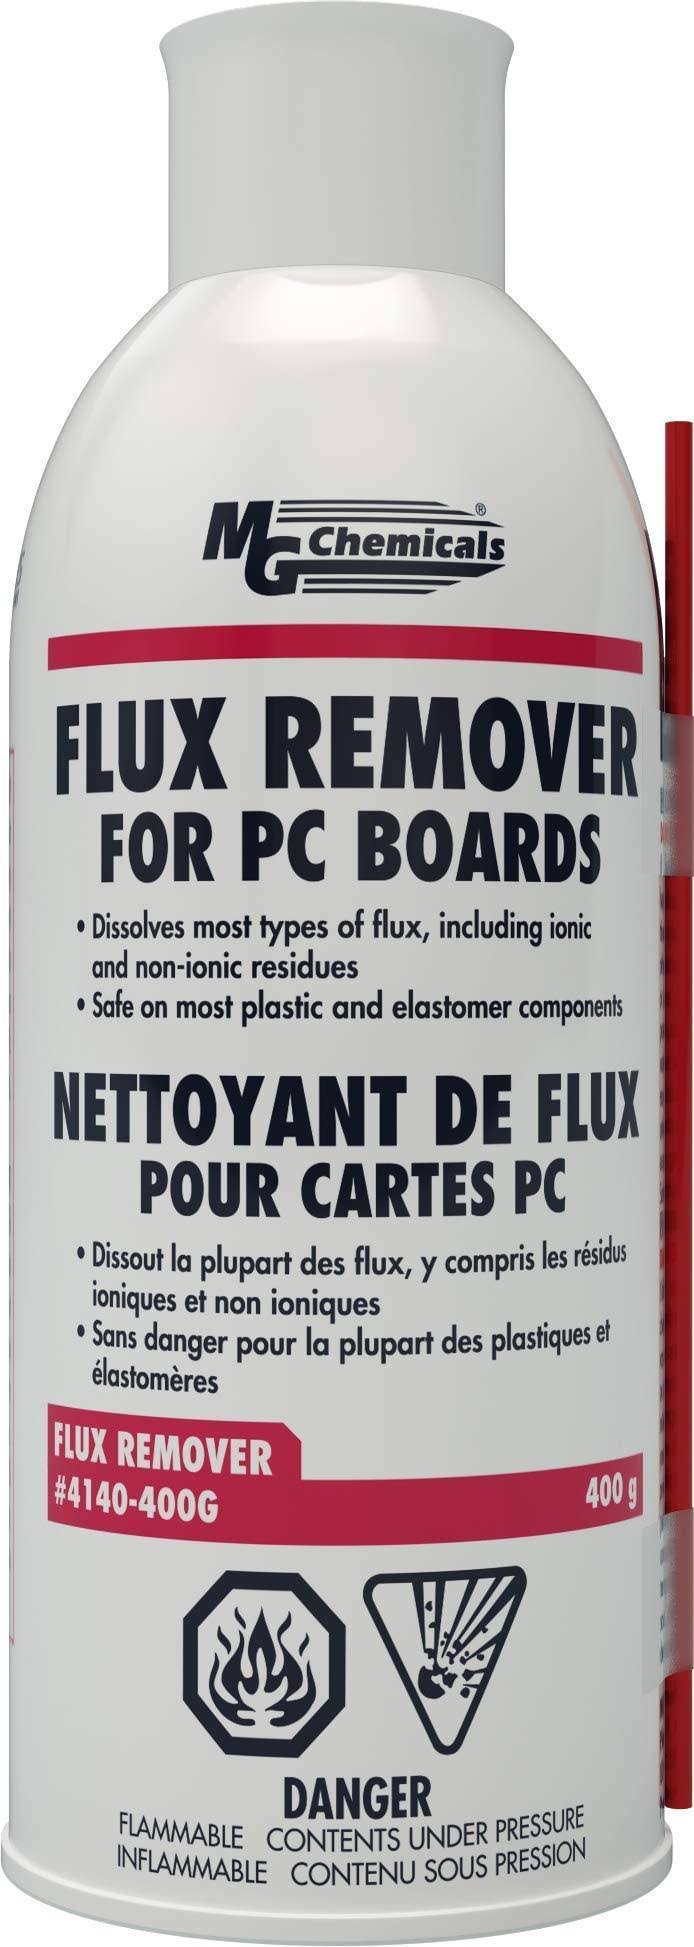 MG Chemicals Flux Remover - for PC Boards, 400g